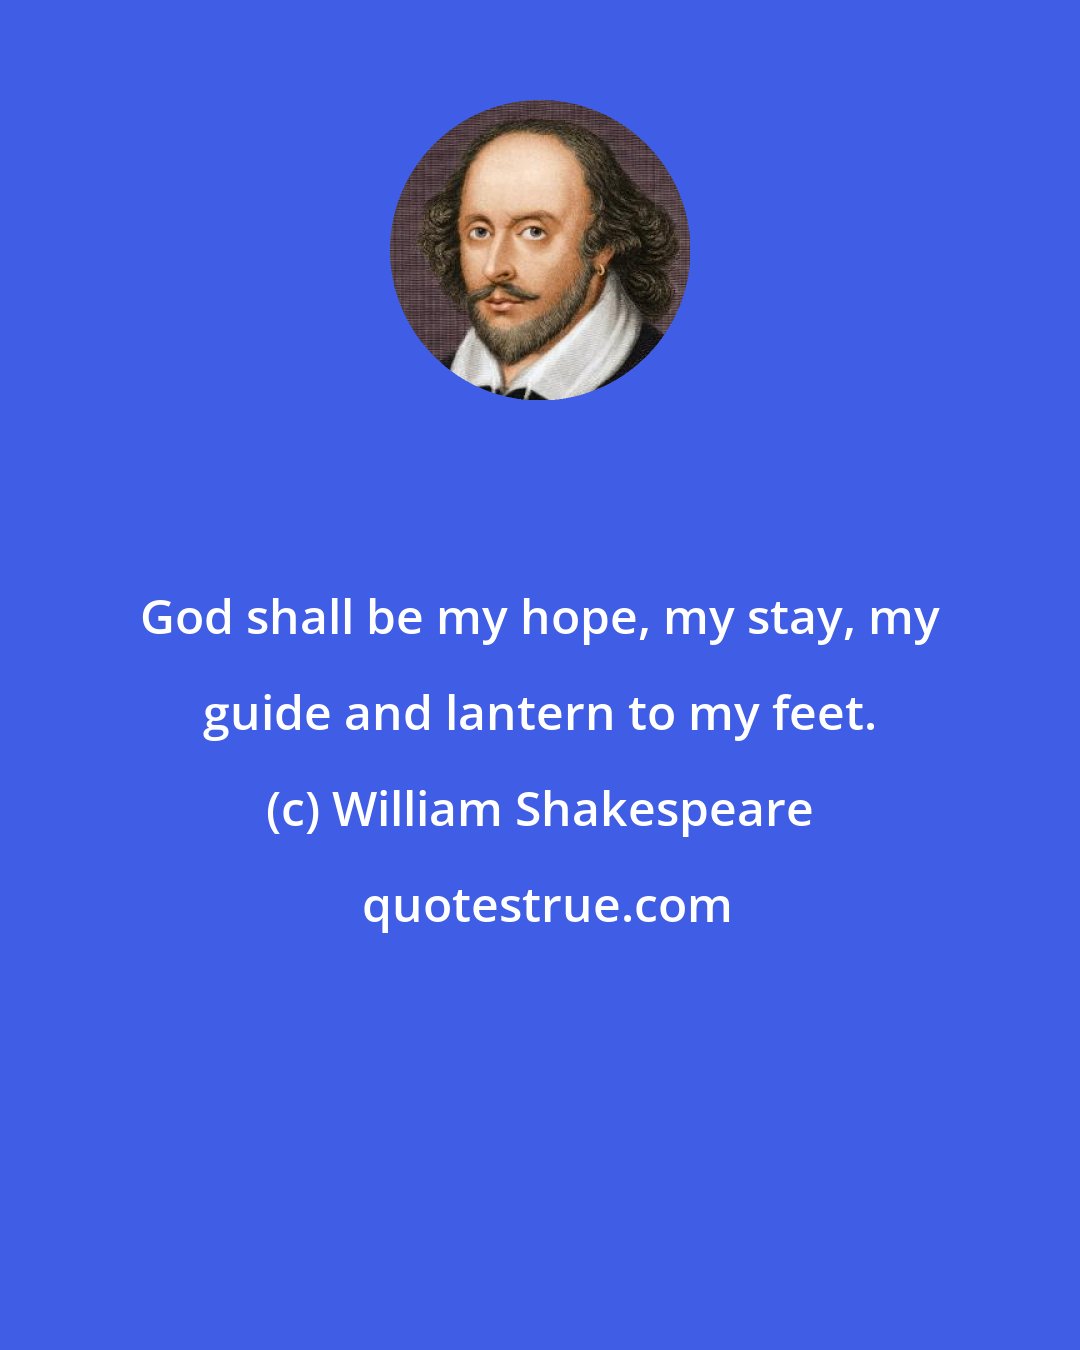 William Shakespeare: God shall be my hope, my stay, my guide and lantern to my feet.